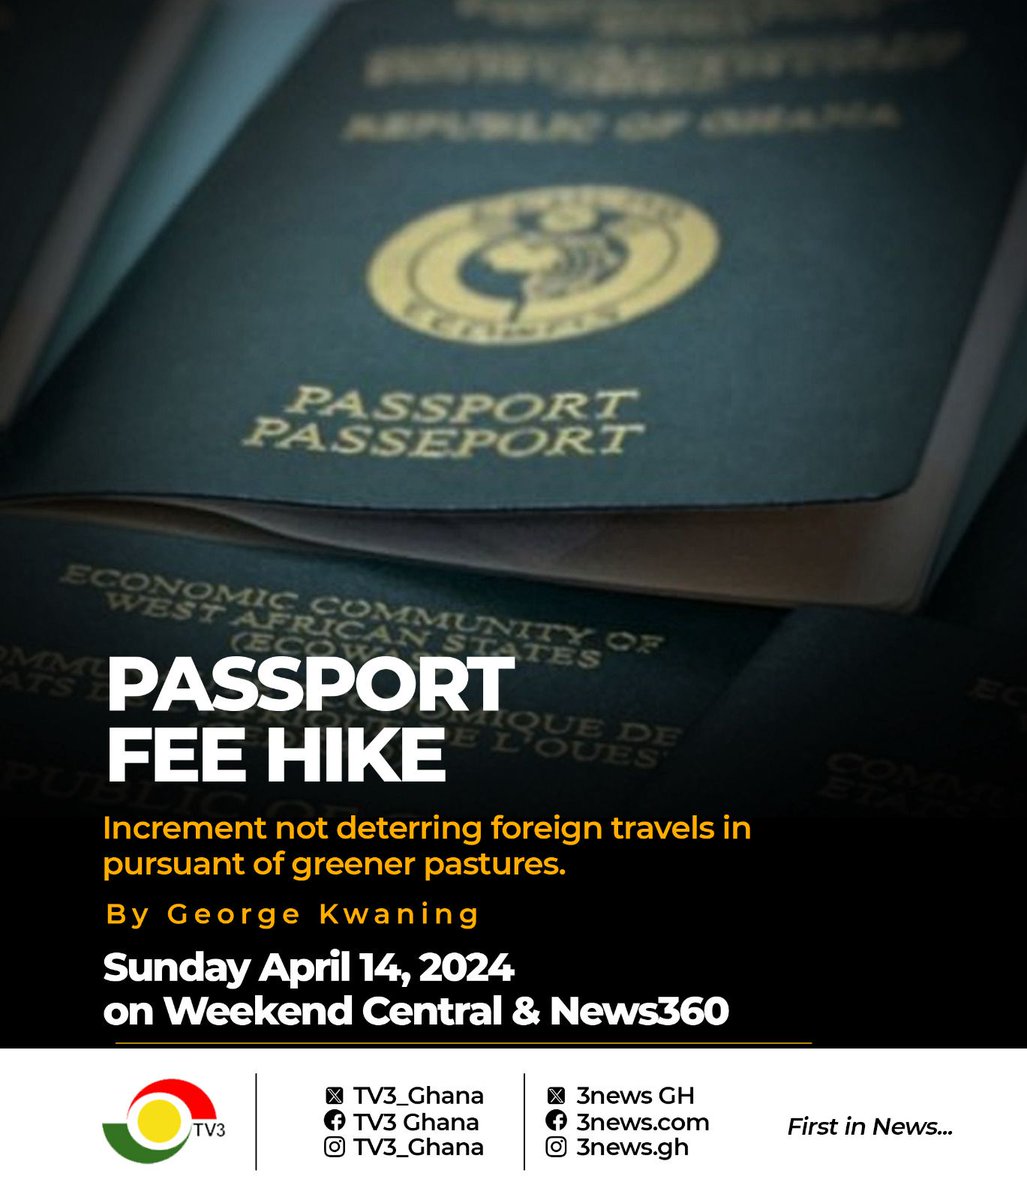 The increment in passports prices is not deterring people from pursuing greener pastures. Join us tomorrow on #WeekendCentral at 12pm and #News360 at 7pm. 

#3NewsGH